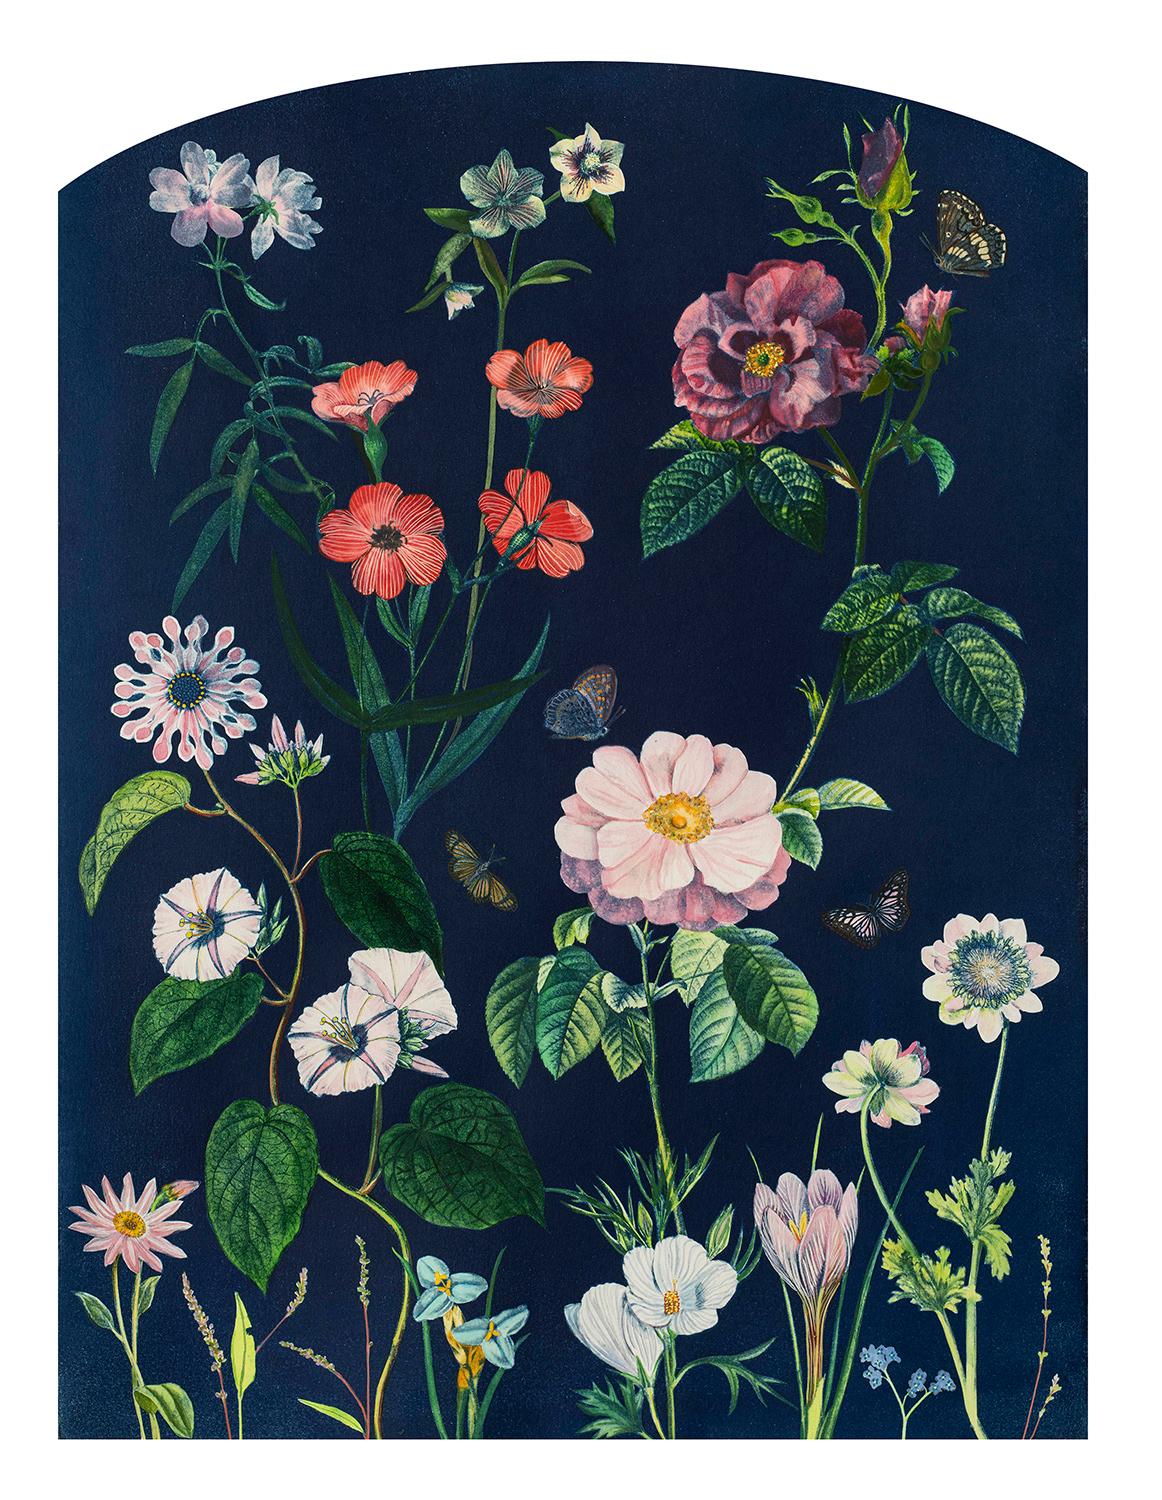 Realistic still life painting of bright flowers on dark blue
Hand-painted cyanotype by Julia Whitney Barnes
